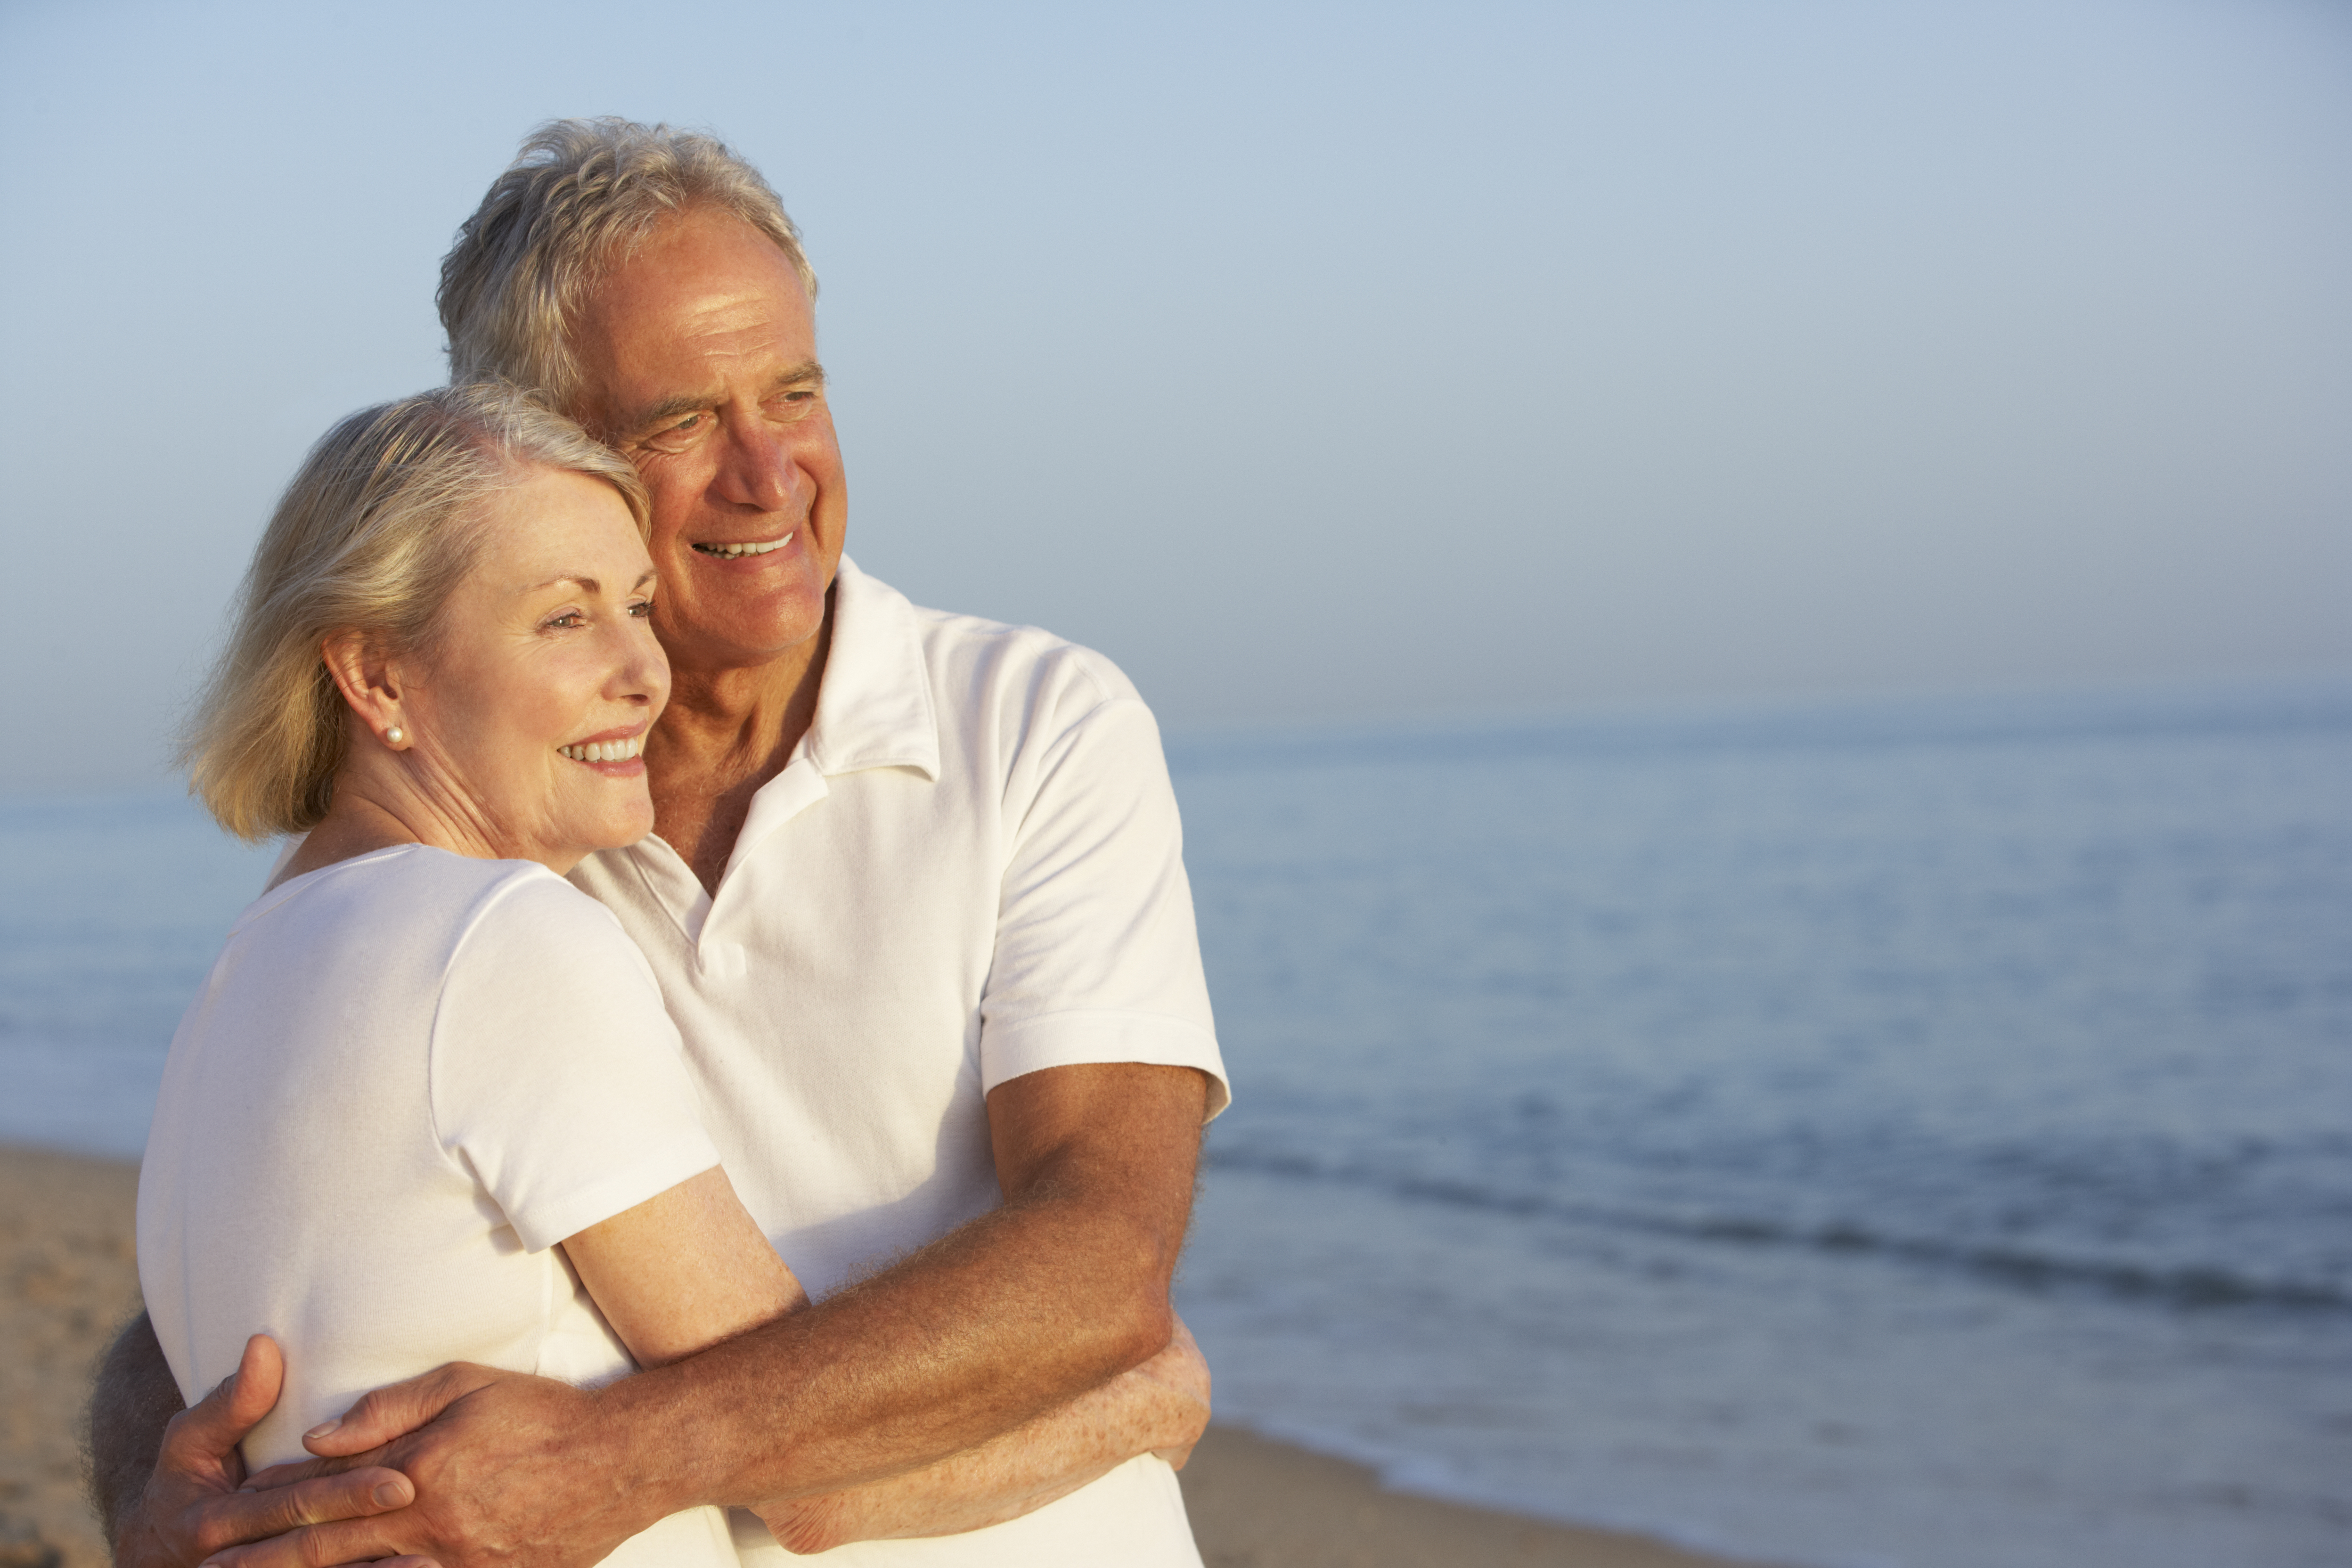 A happy older couple looking out at the ocean | Source: Shutterstock